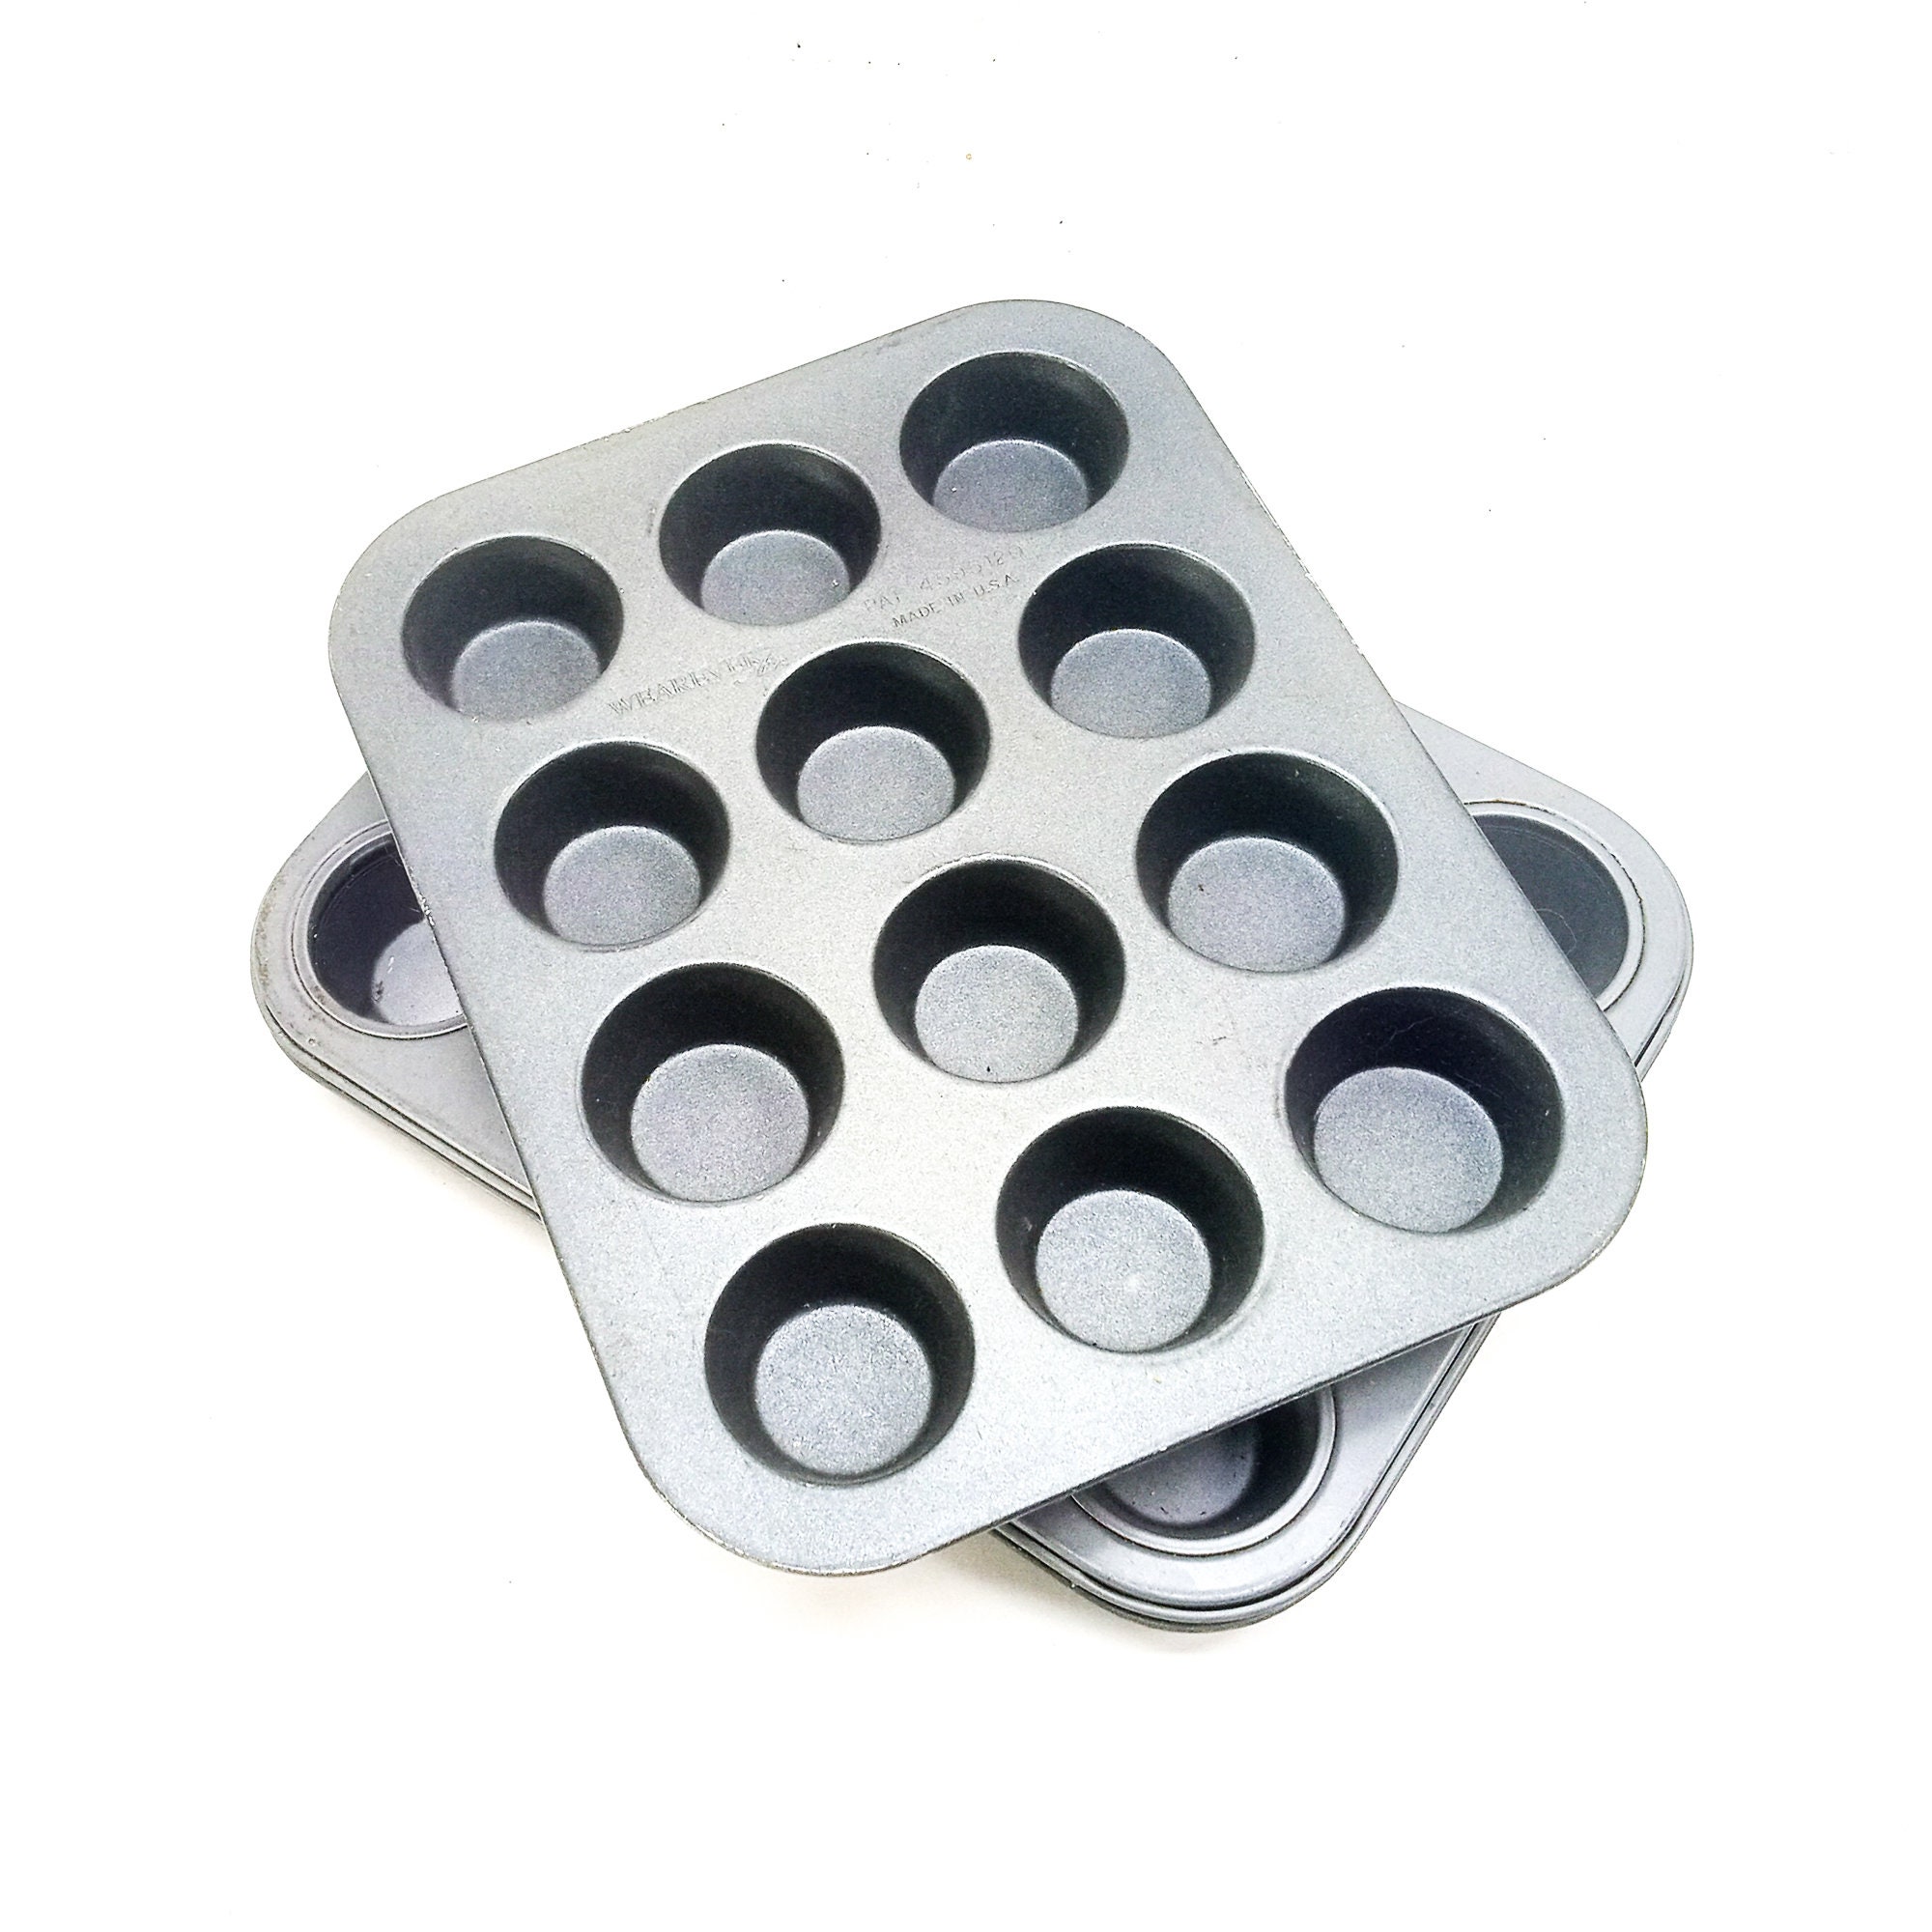 Vintage Wearever Commercial Aluminum #5327 24 Cupcake Muffin Pan